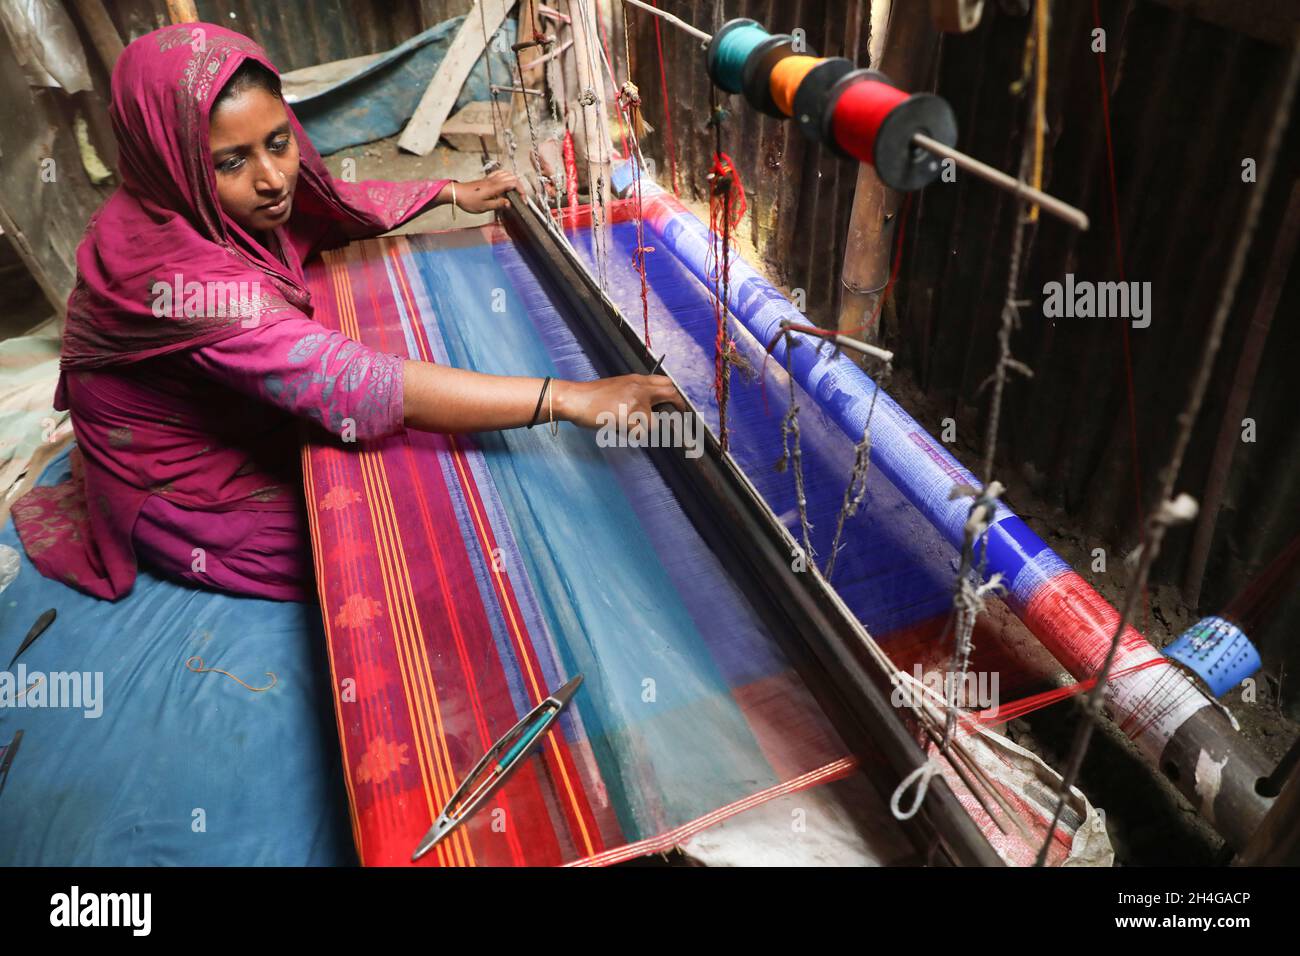 Dhaka, Bangladesh. 02nd Nov, 2021. Rina Begum seen making Jamdani saree at Demra Jamdani Palli. Jamdani is one of the finest muslin textiels of Bengal, produced in Dhaka District, Bangladesh for centuries. The Historic production of jamdani was patronized by imperial warrants of the Mughal emperors. Under British colonialism, the Bengali Jamdani and muslin industries rapidly declined due to colonial import policies favoring industrially manufactured textiles. Credit: SOPA Images Limited/Alamy Live News Stock Photo